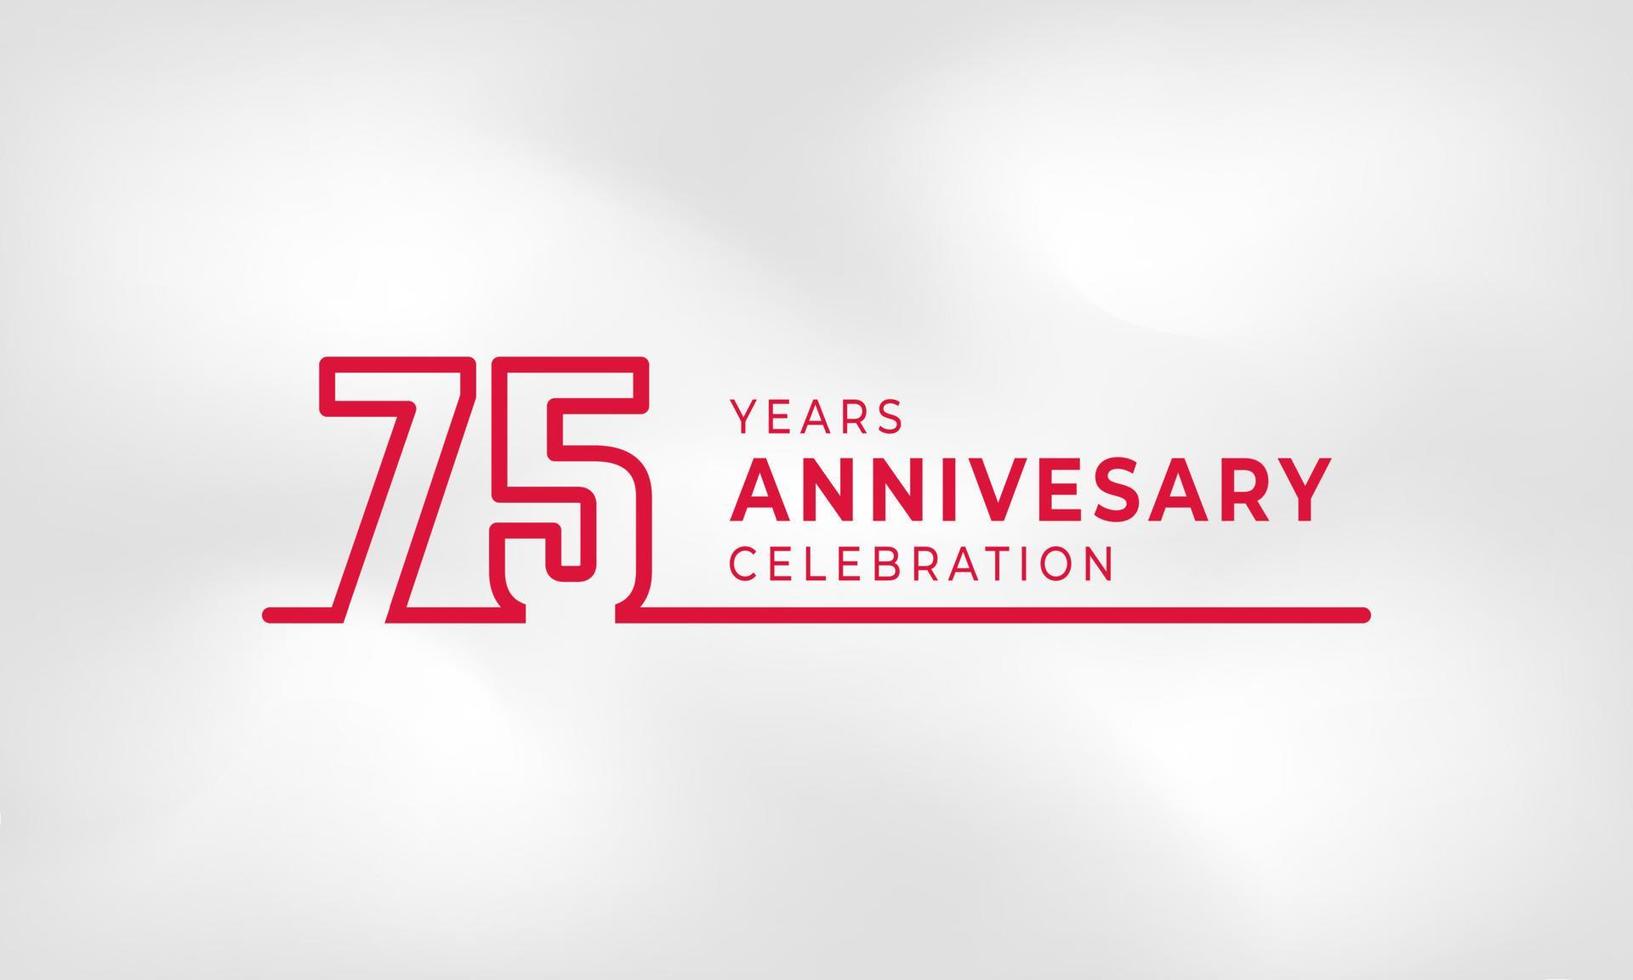 75 Year Anniversary Celebration Linked Logotype Outline Number Red Color for Celebration Event, Wedding, Greeting card, and Invitation Isolated on White Texture Background vector